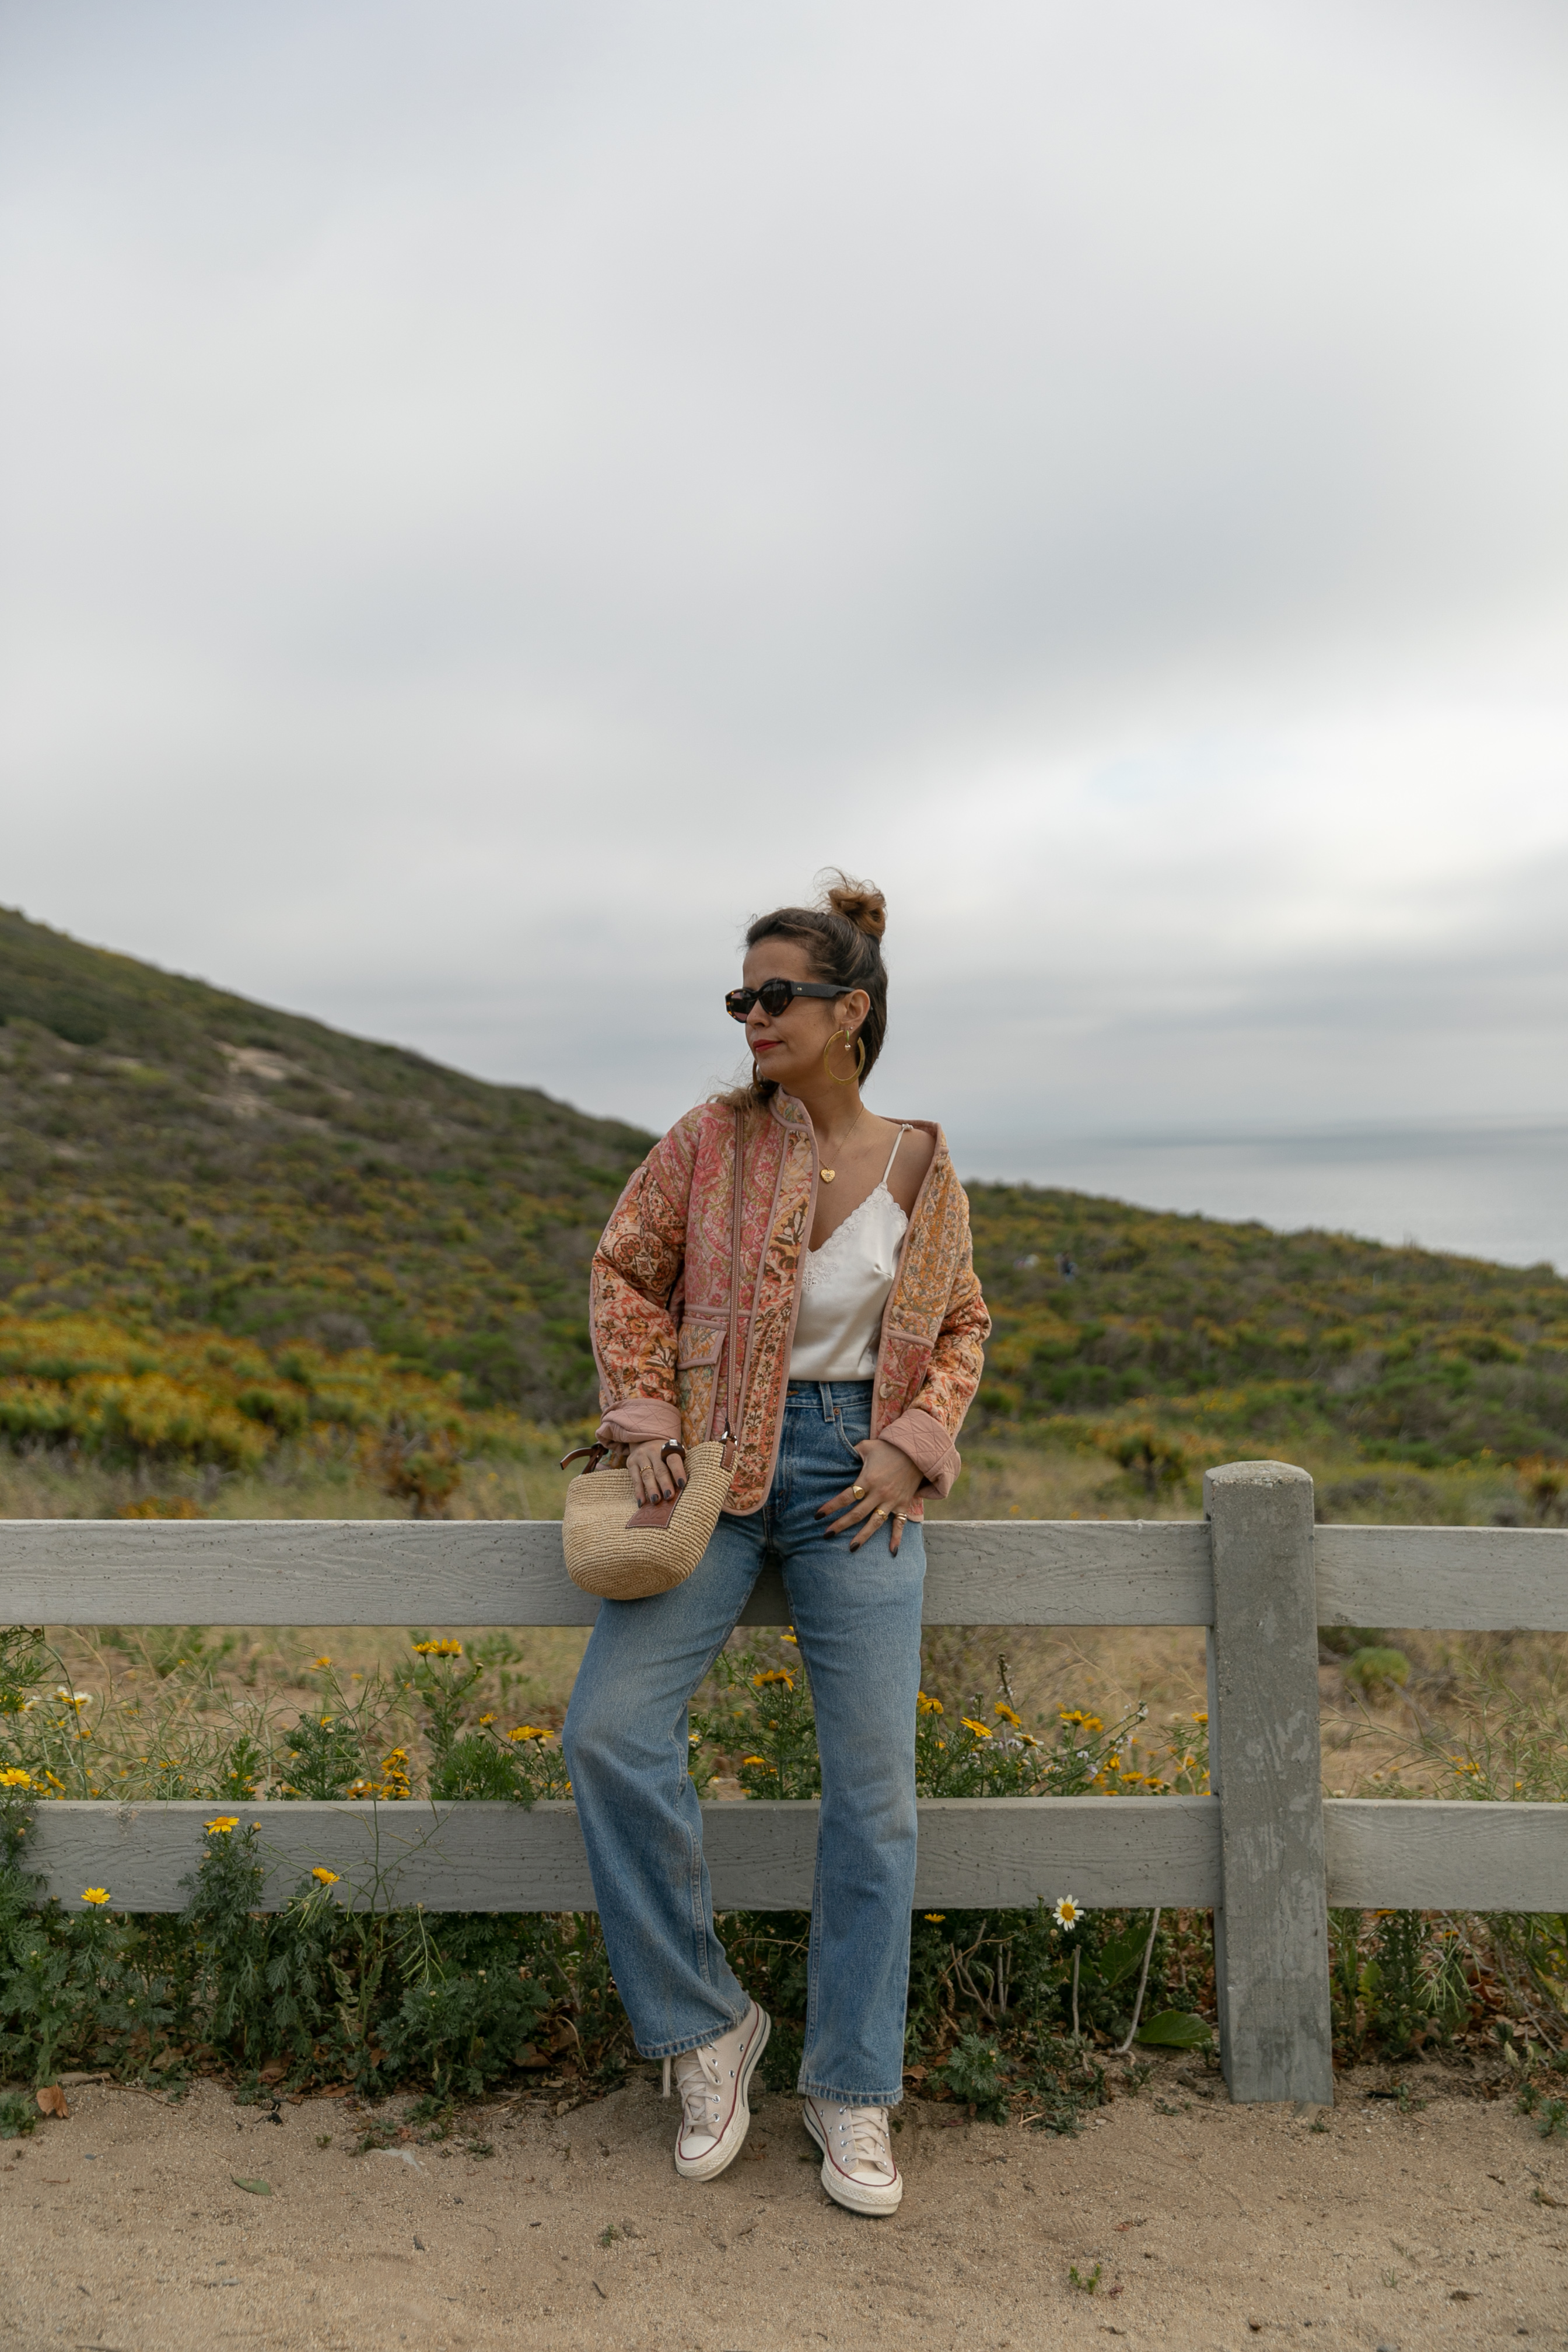 Sara from Collage Vintage wearing a patchwork jacket and vintage Levis